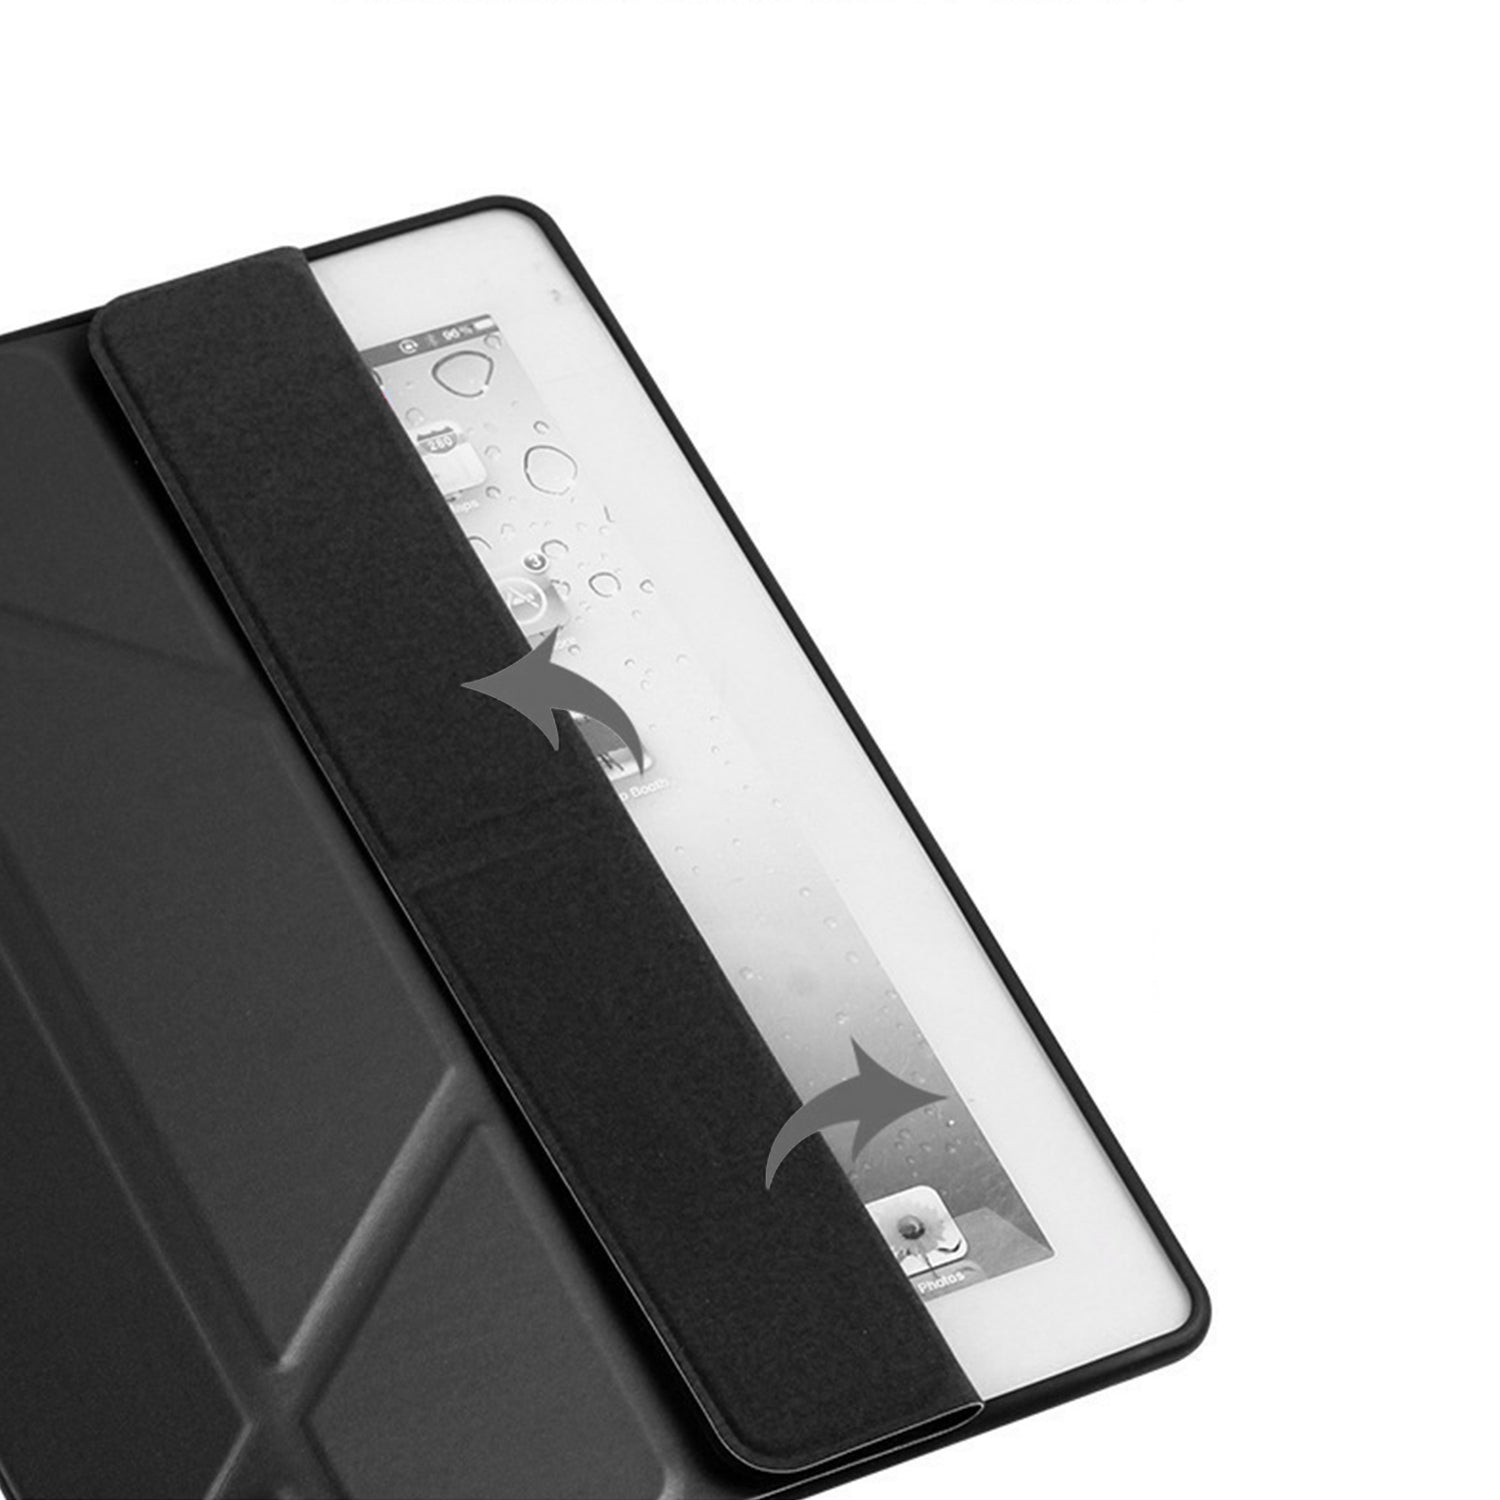 Smart and Kickstand Case for iPad Air 2